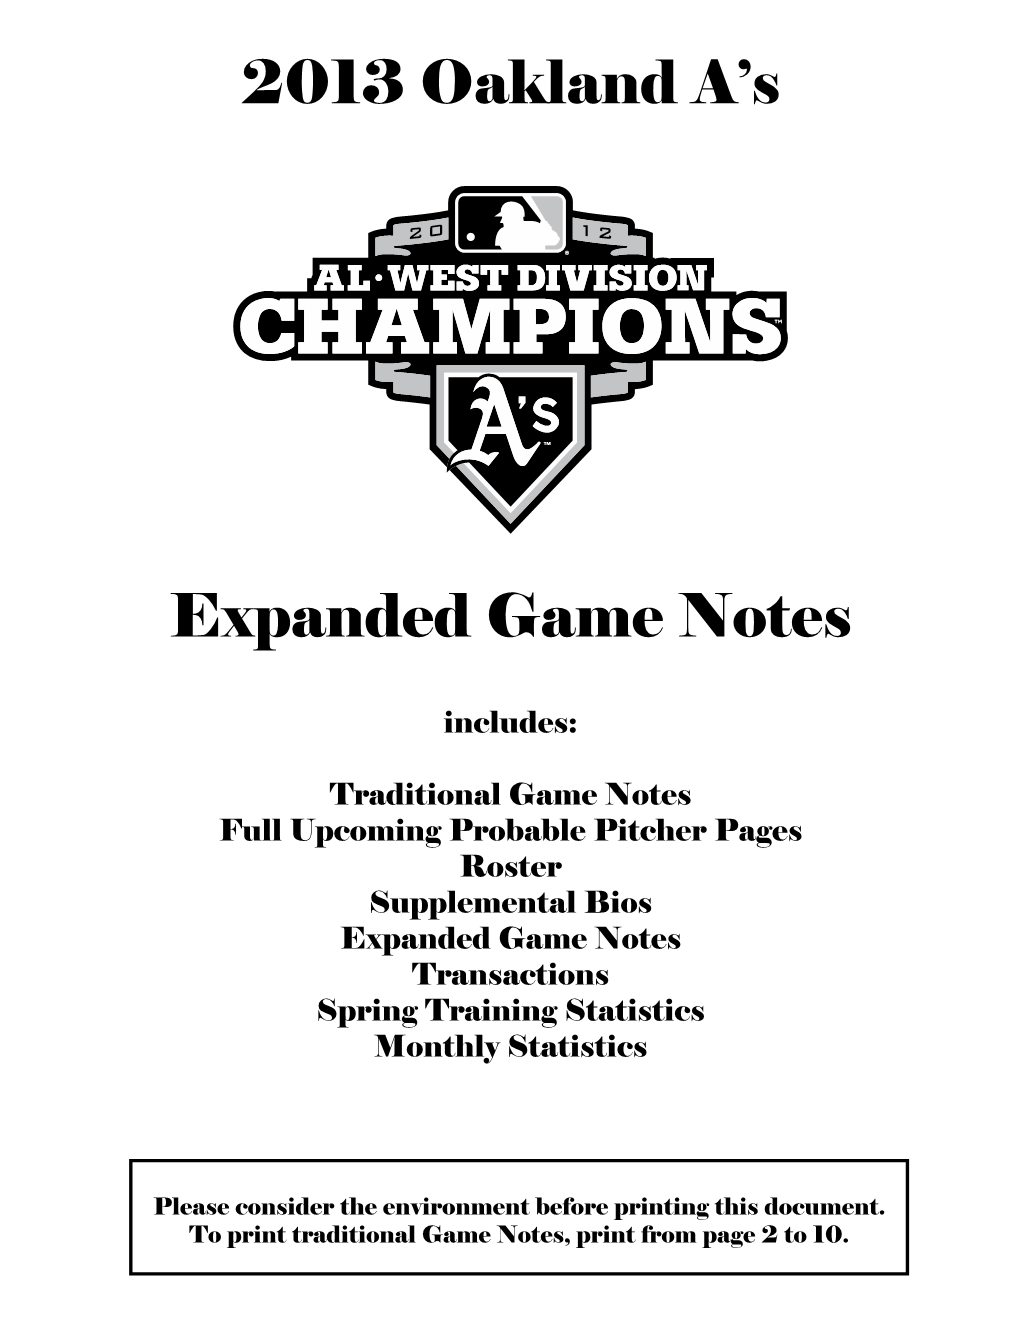 2013 Oakland A's Expanded Game Notes